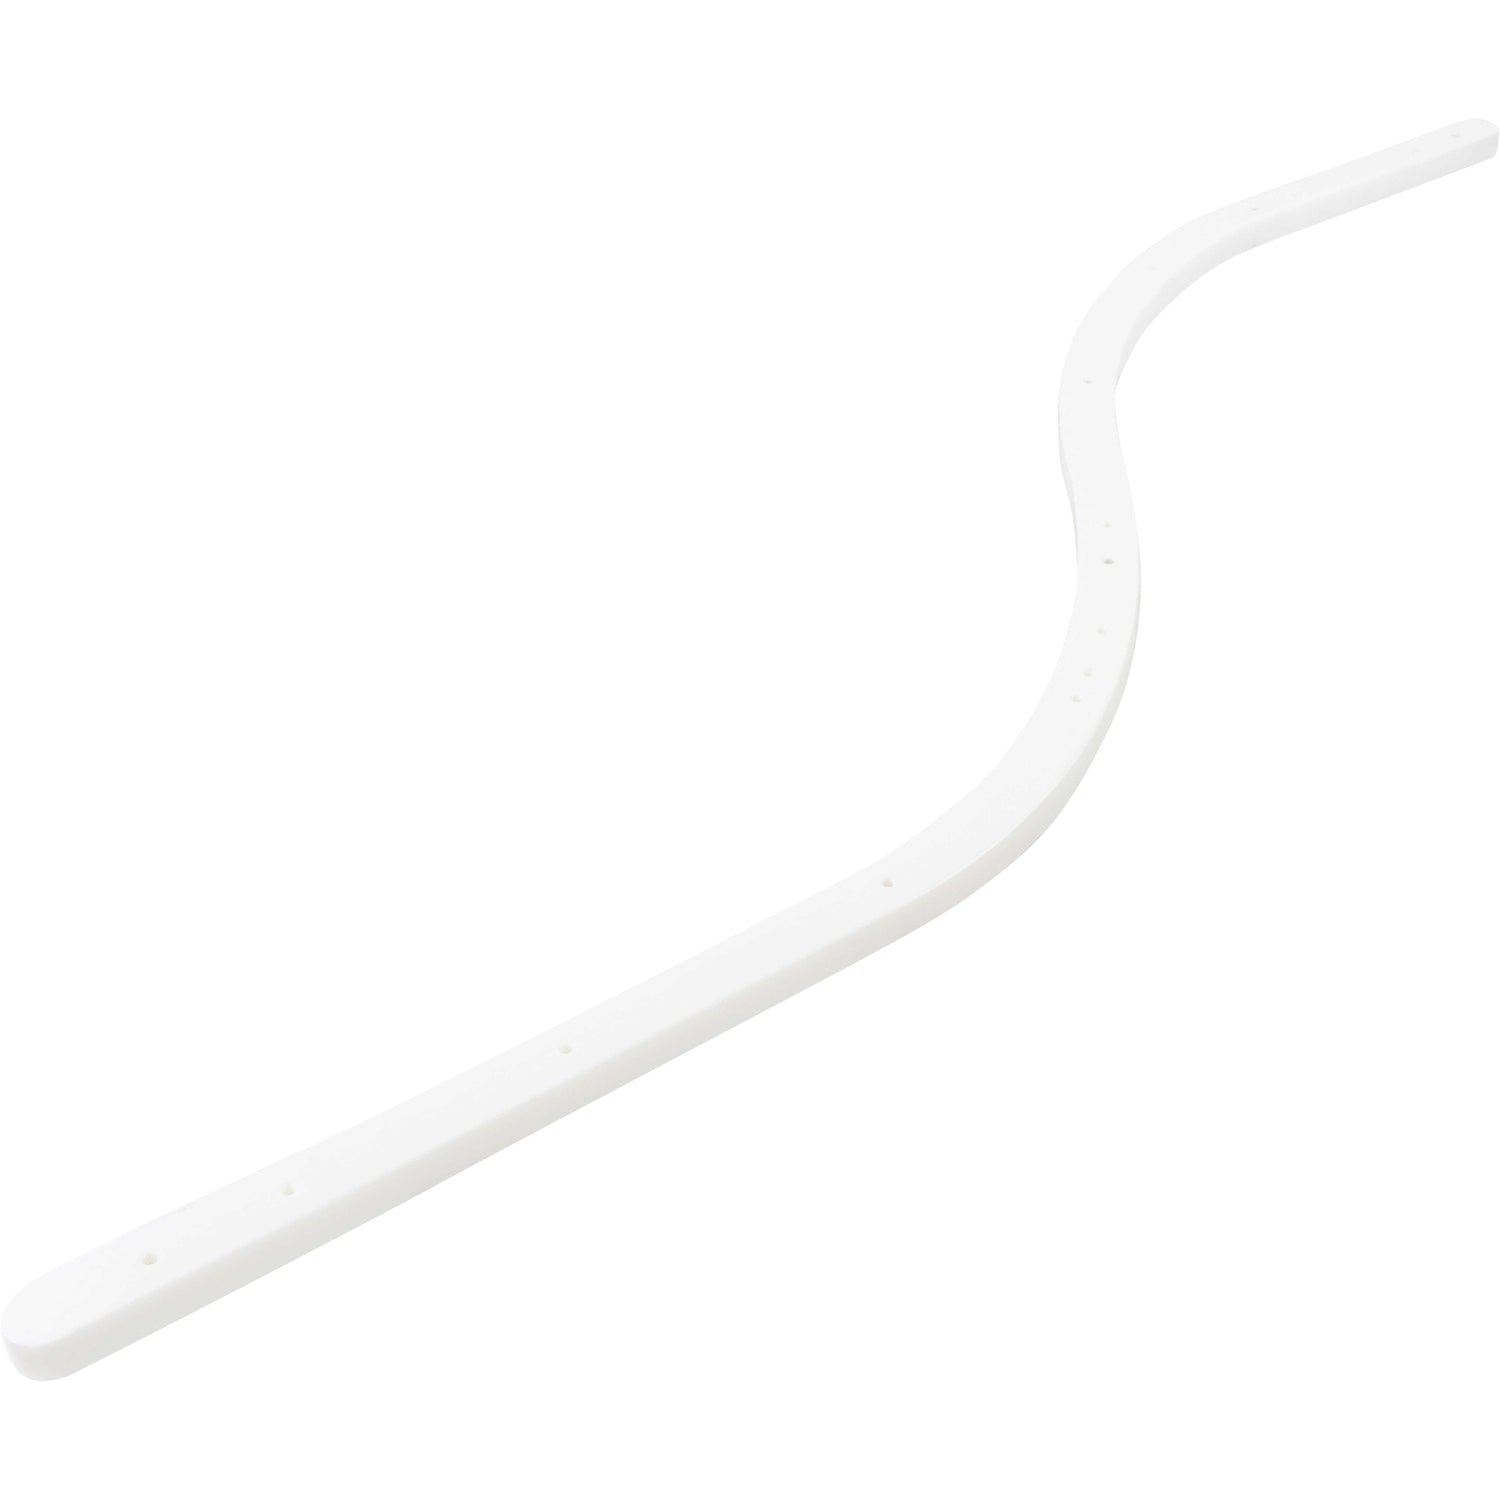 White "S" shaped plastic rail with multiple mounting holes. Rail is shown on a white background. 